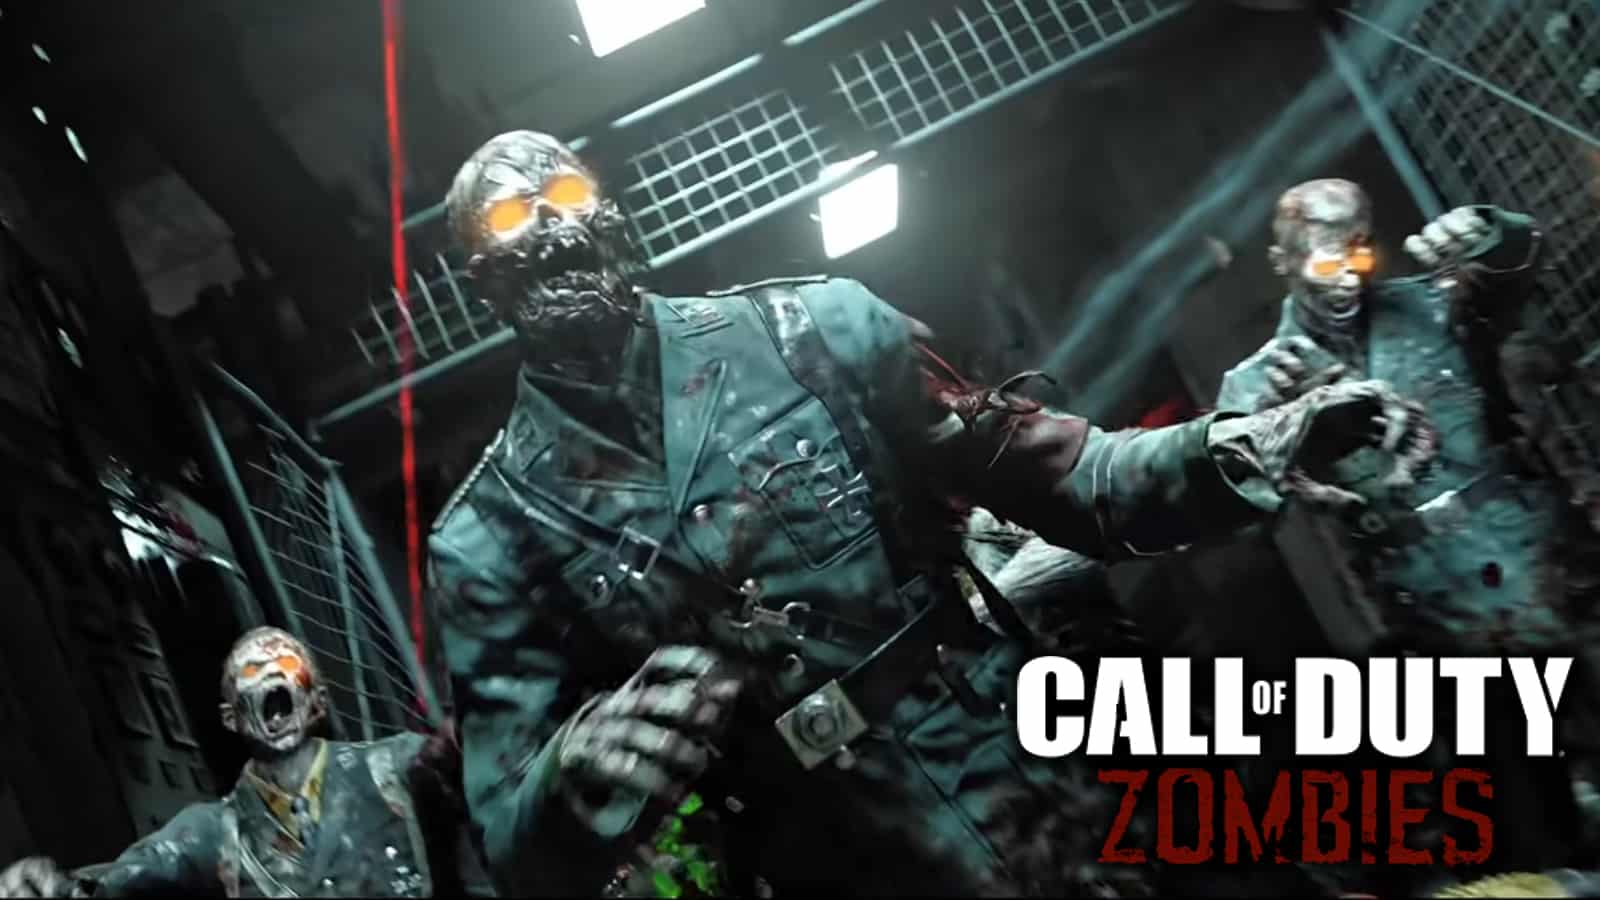 Treyarch will develop the Zombies Mode for Call of Duty: Vanguard